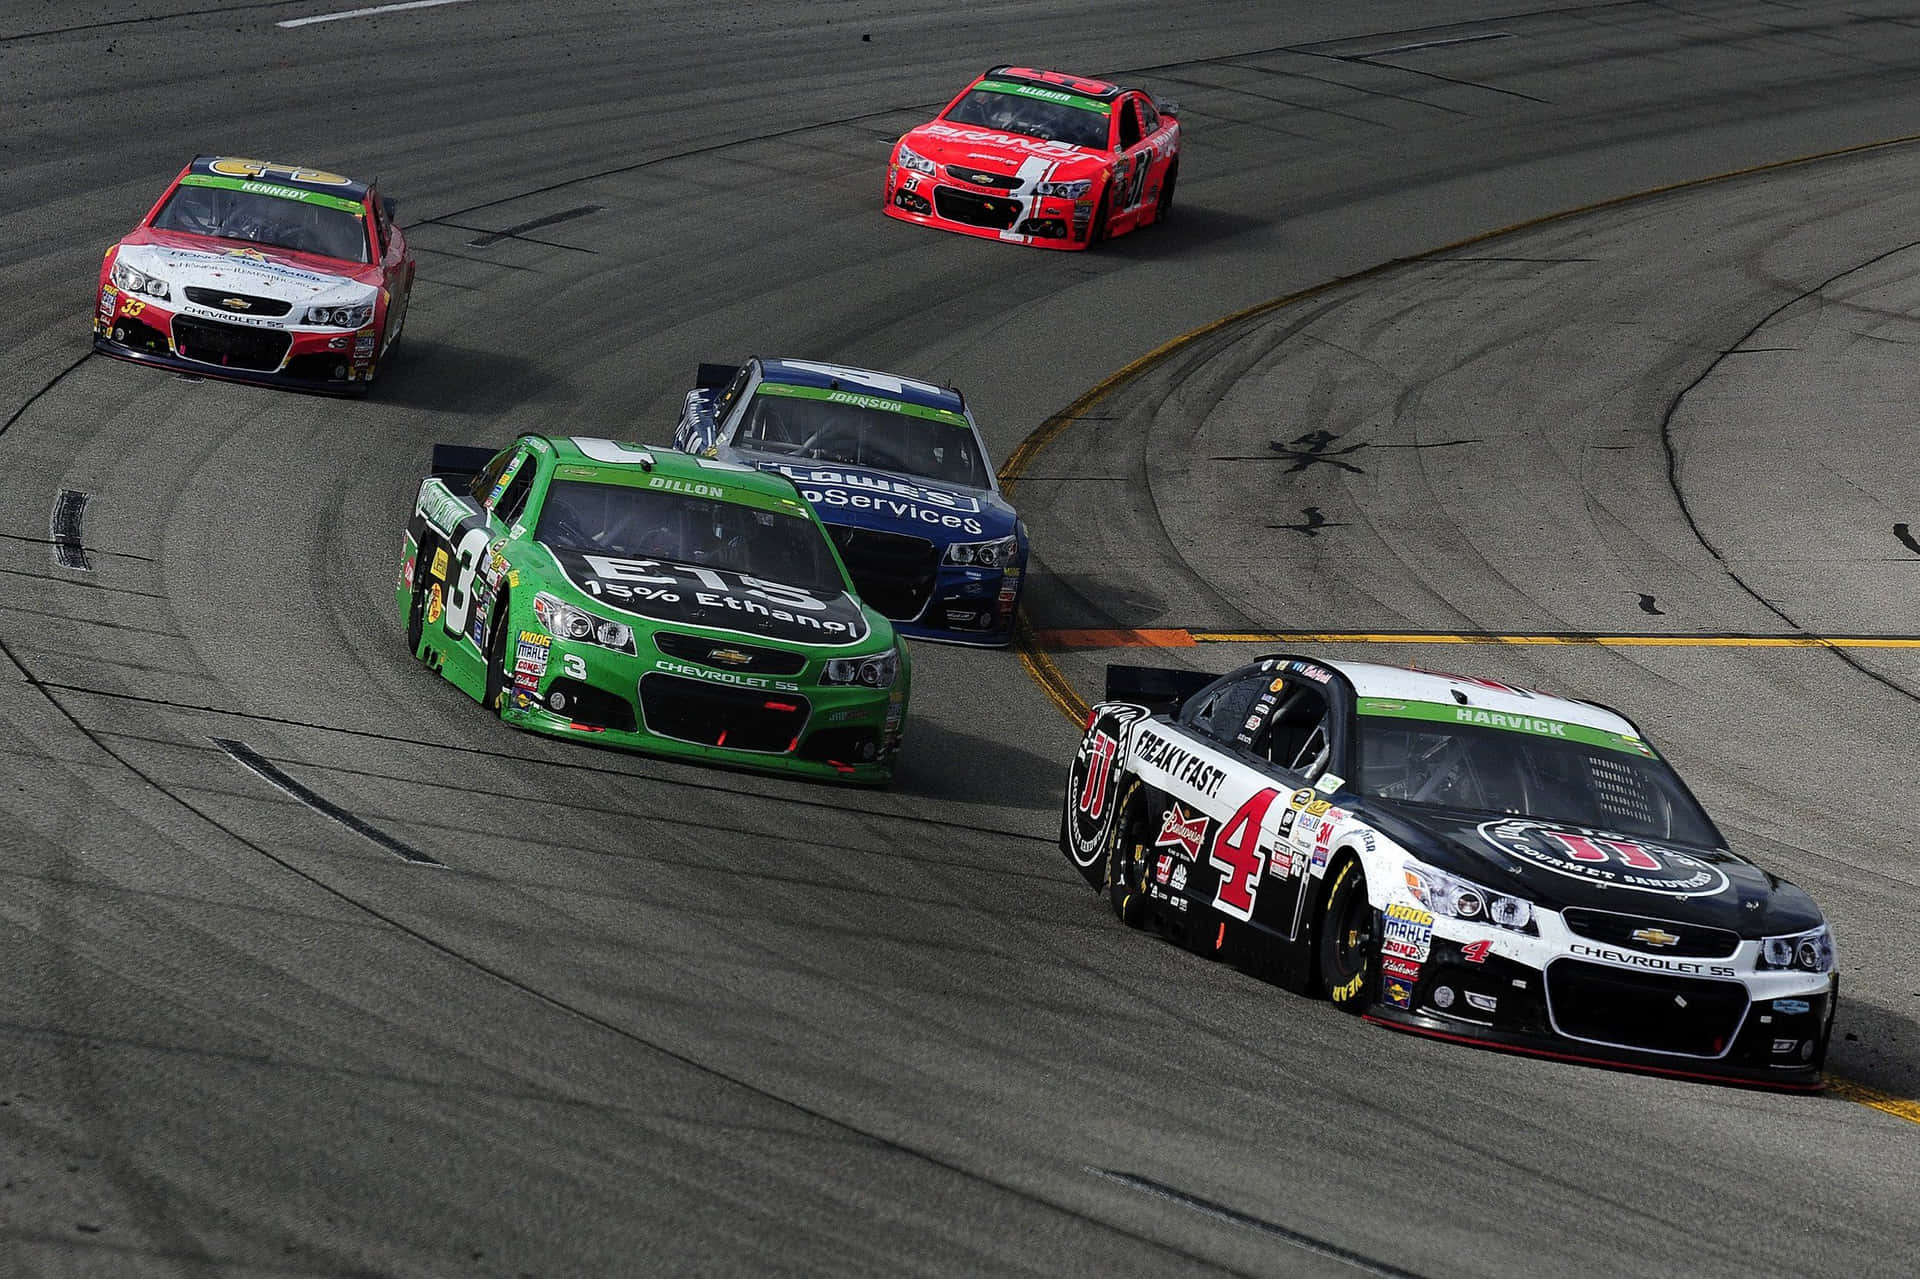 Follow the Action of NASCAR at Heightened Speed